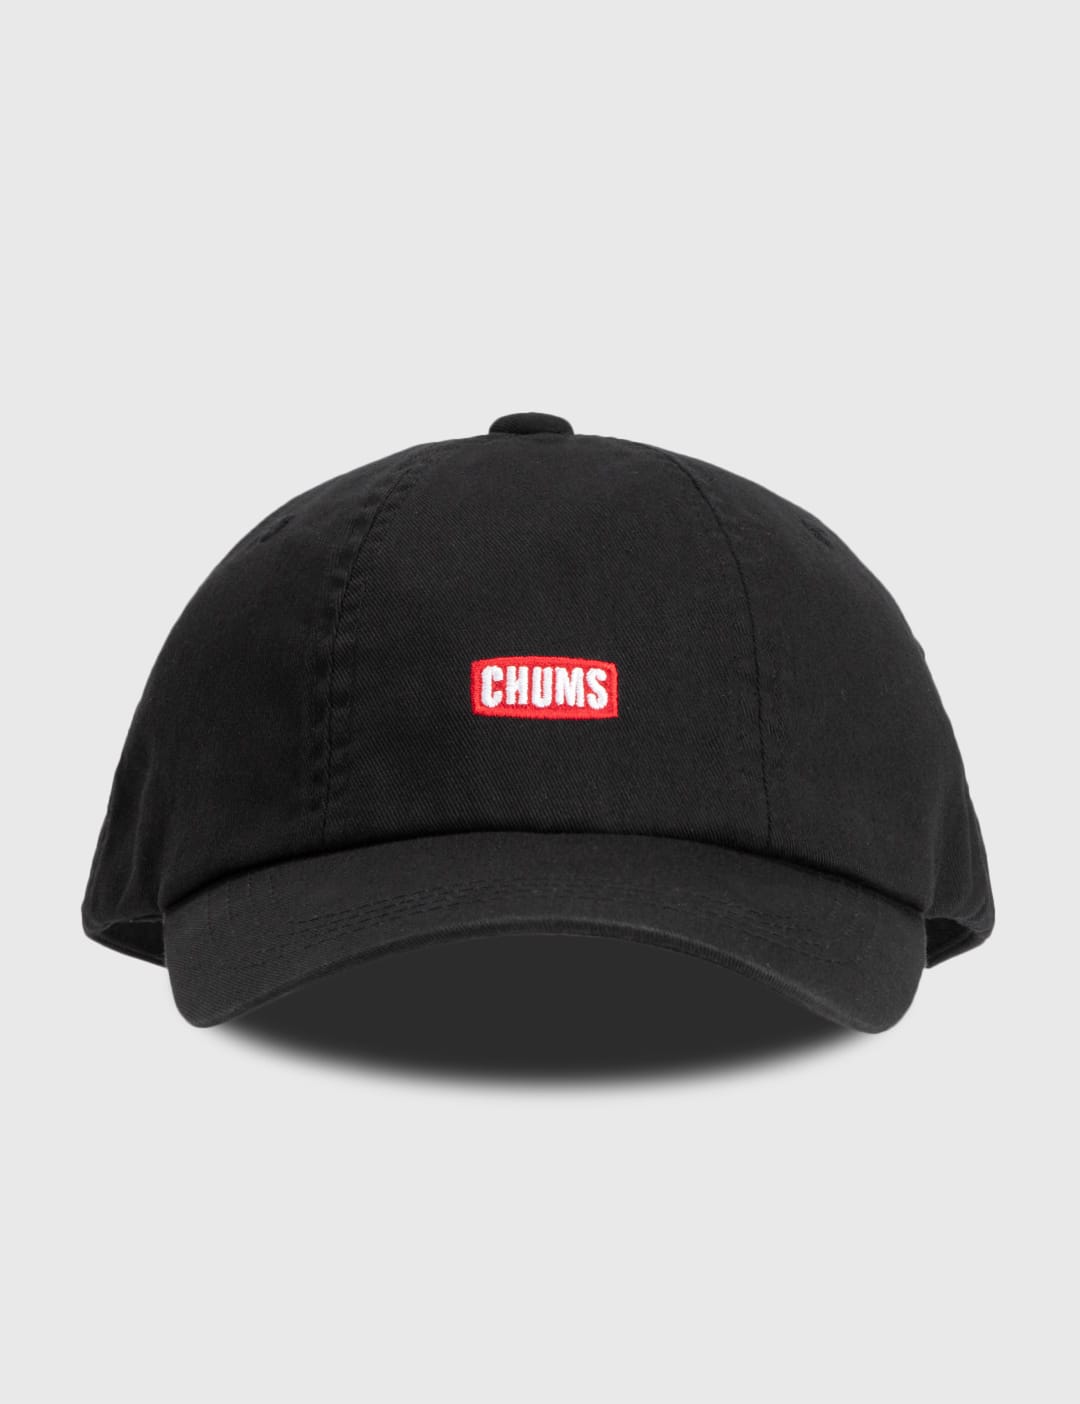 Chums | HBX - Globally Curated Fashion and Lifestyle by Hypebeast